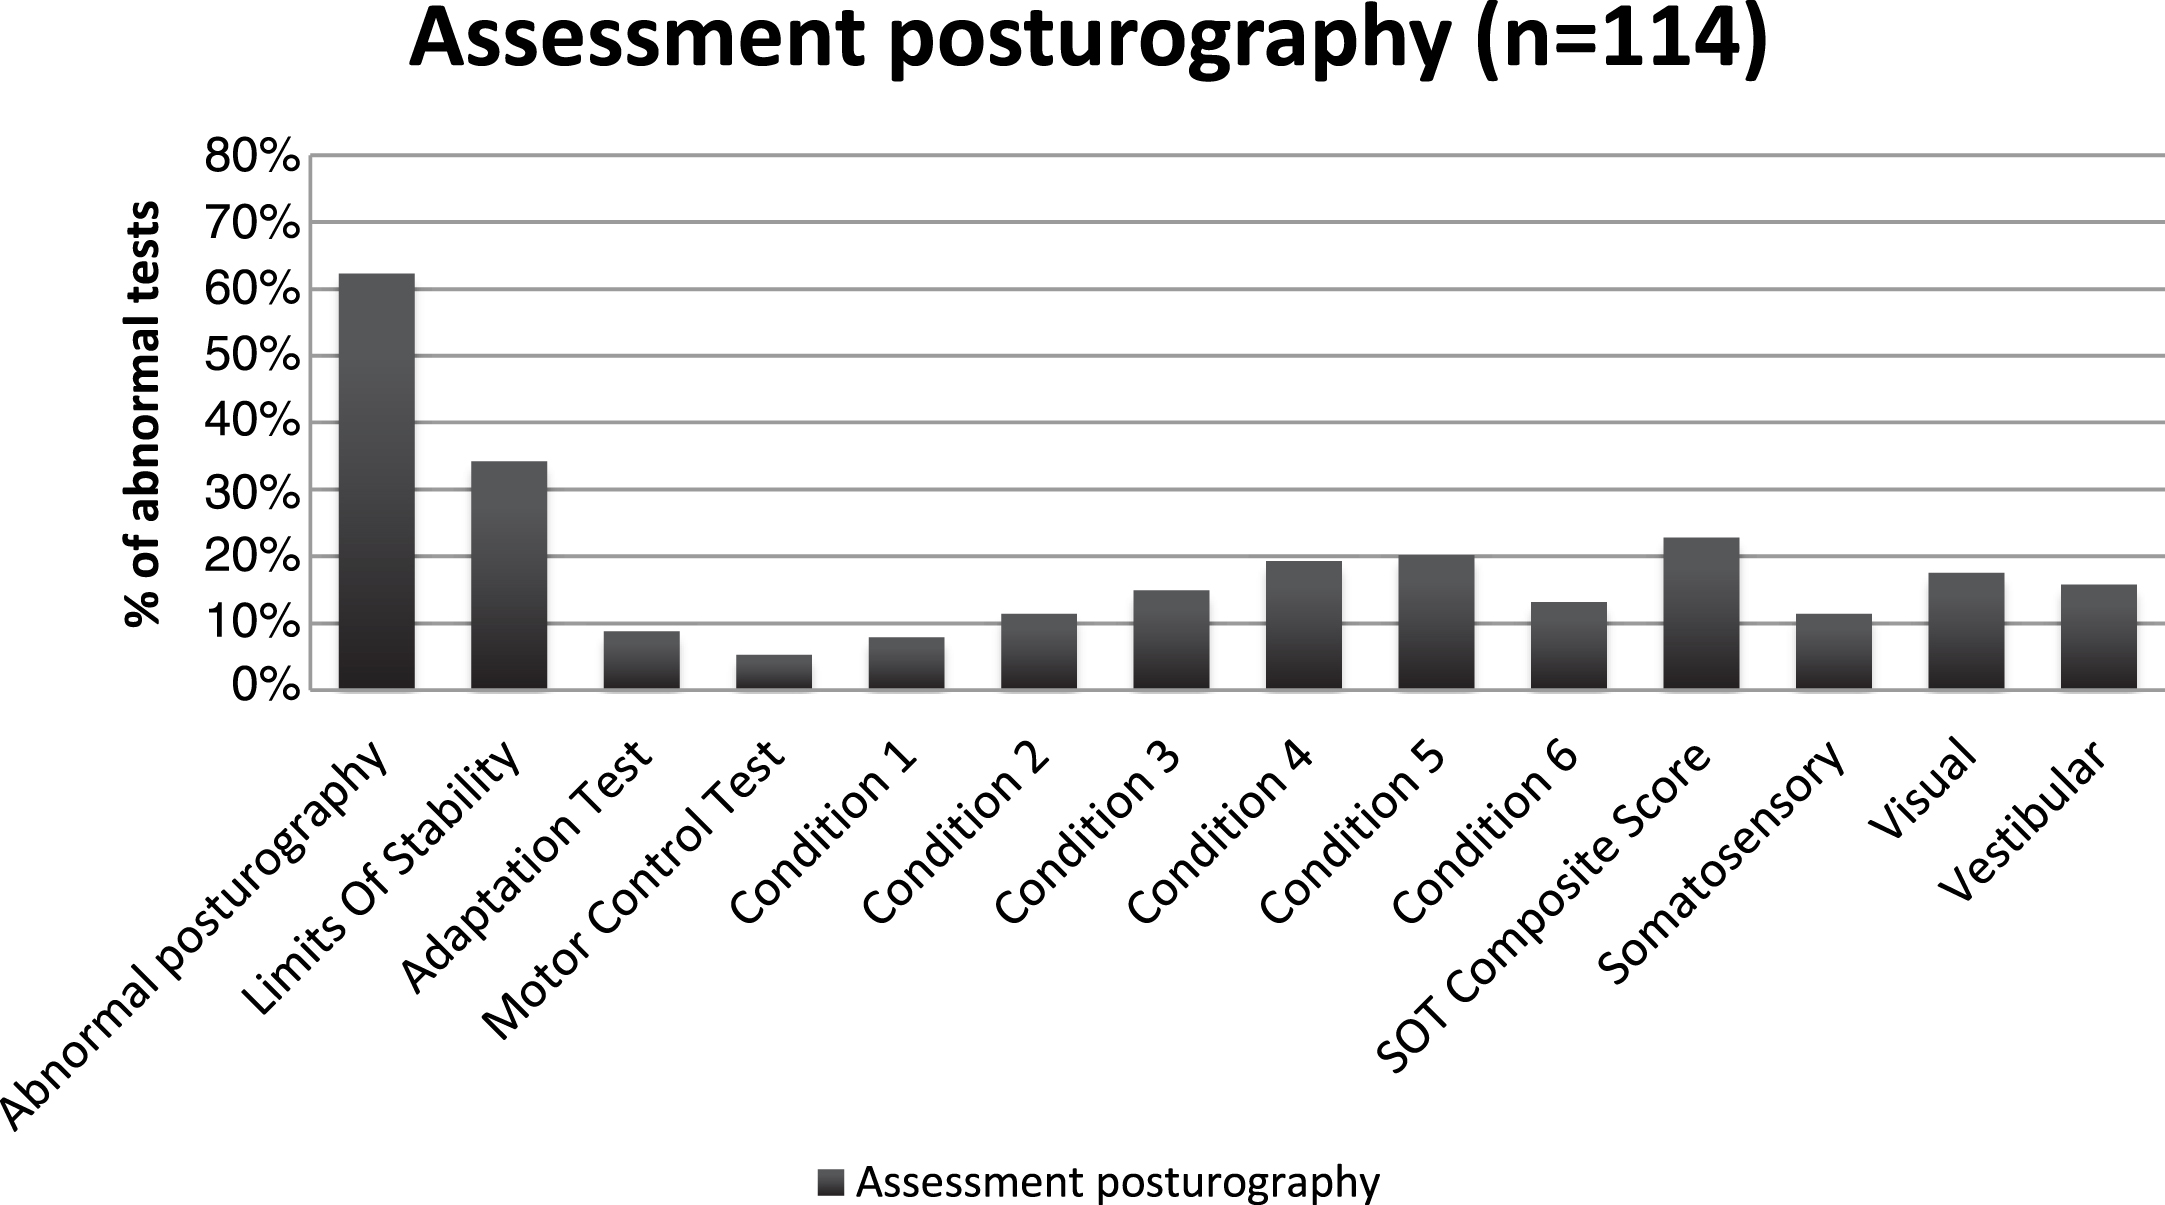 Distribution of abnormal tests on assessment posturography.